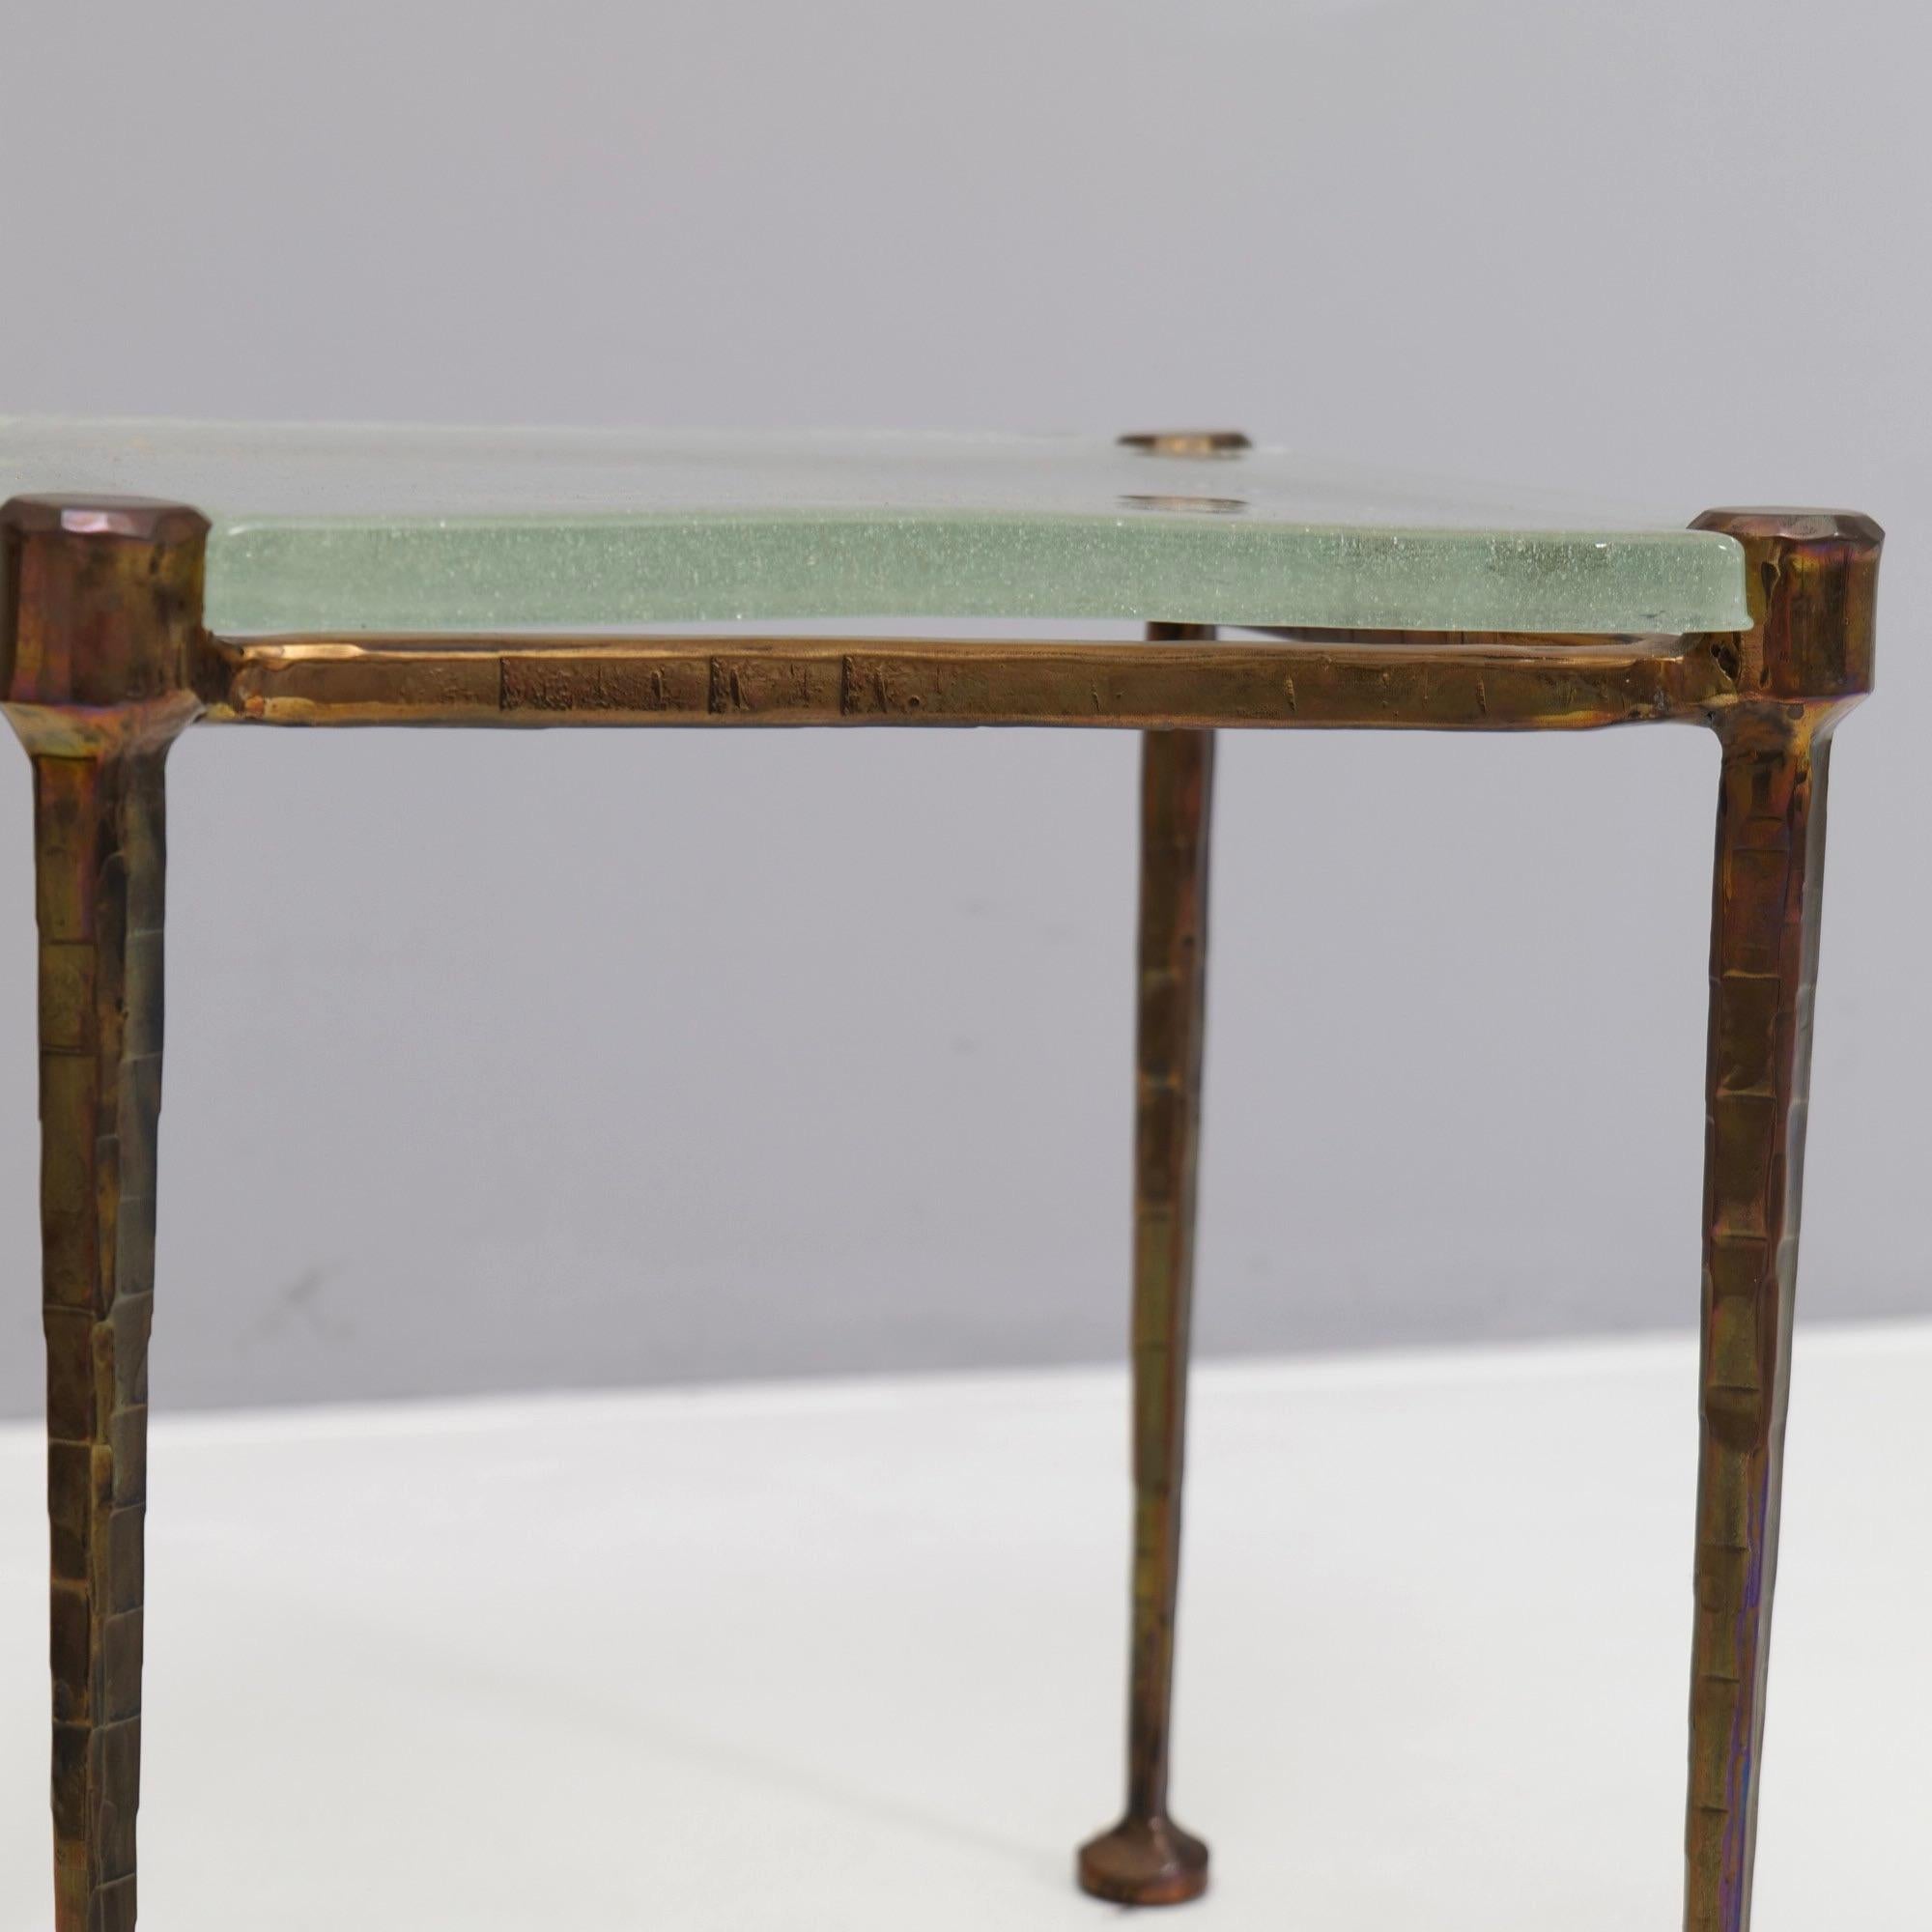 German square forged bronze table with cast glass Lothar klute attr. - 1980s brutalist For Sale